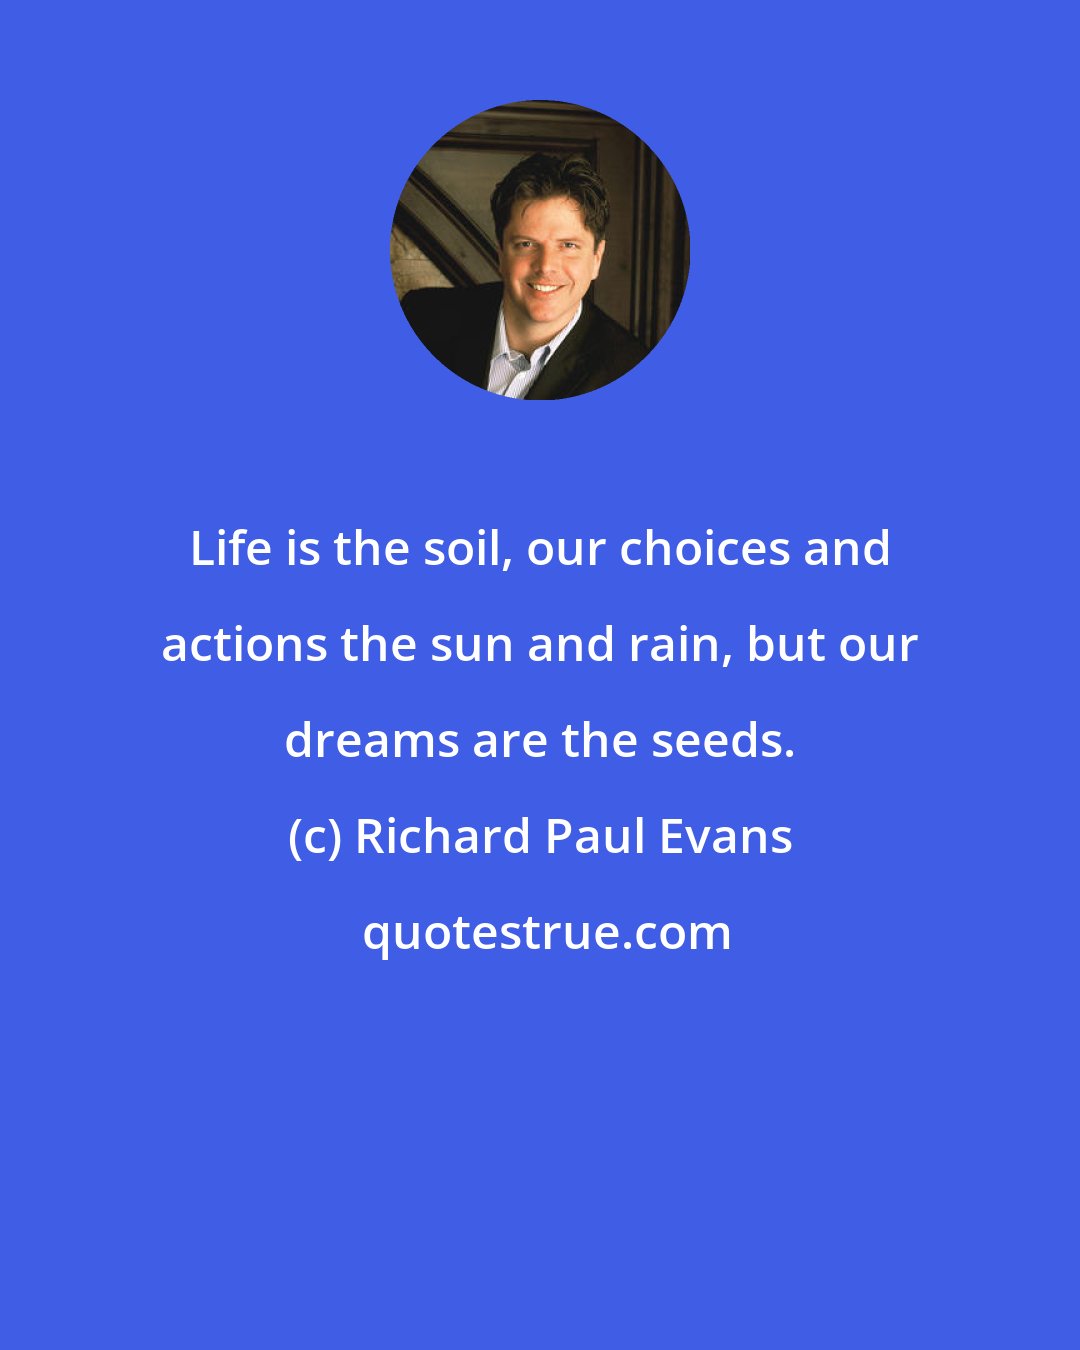 Richard Paul Evans: Life is the soil, our choices and actions the sun and rain, but our dreams are the seeds.